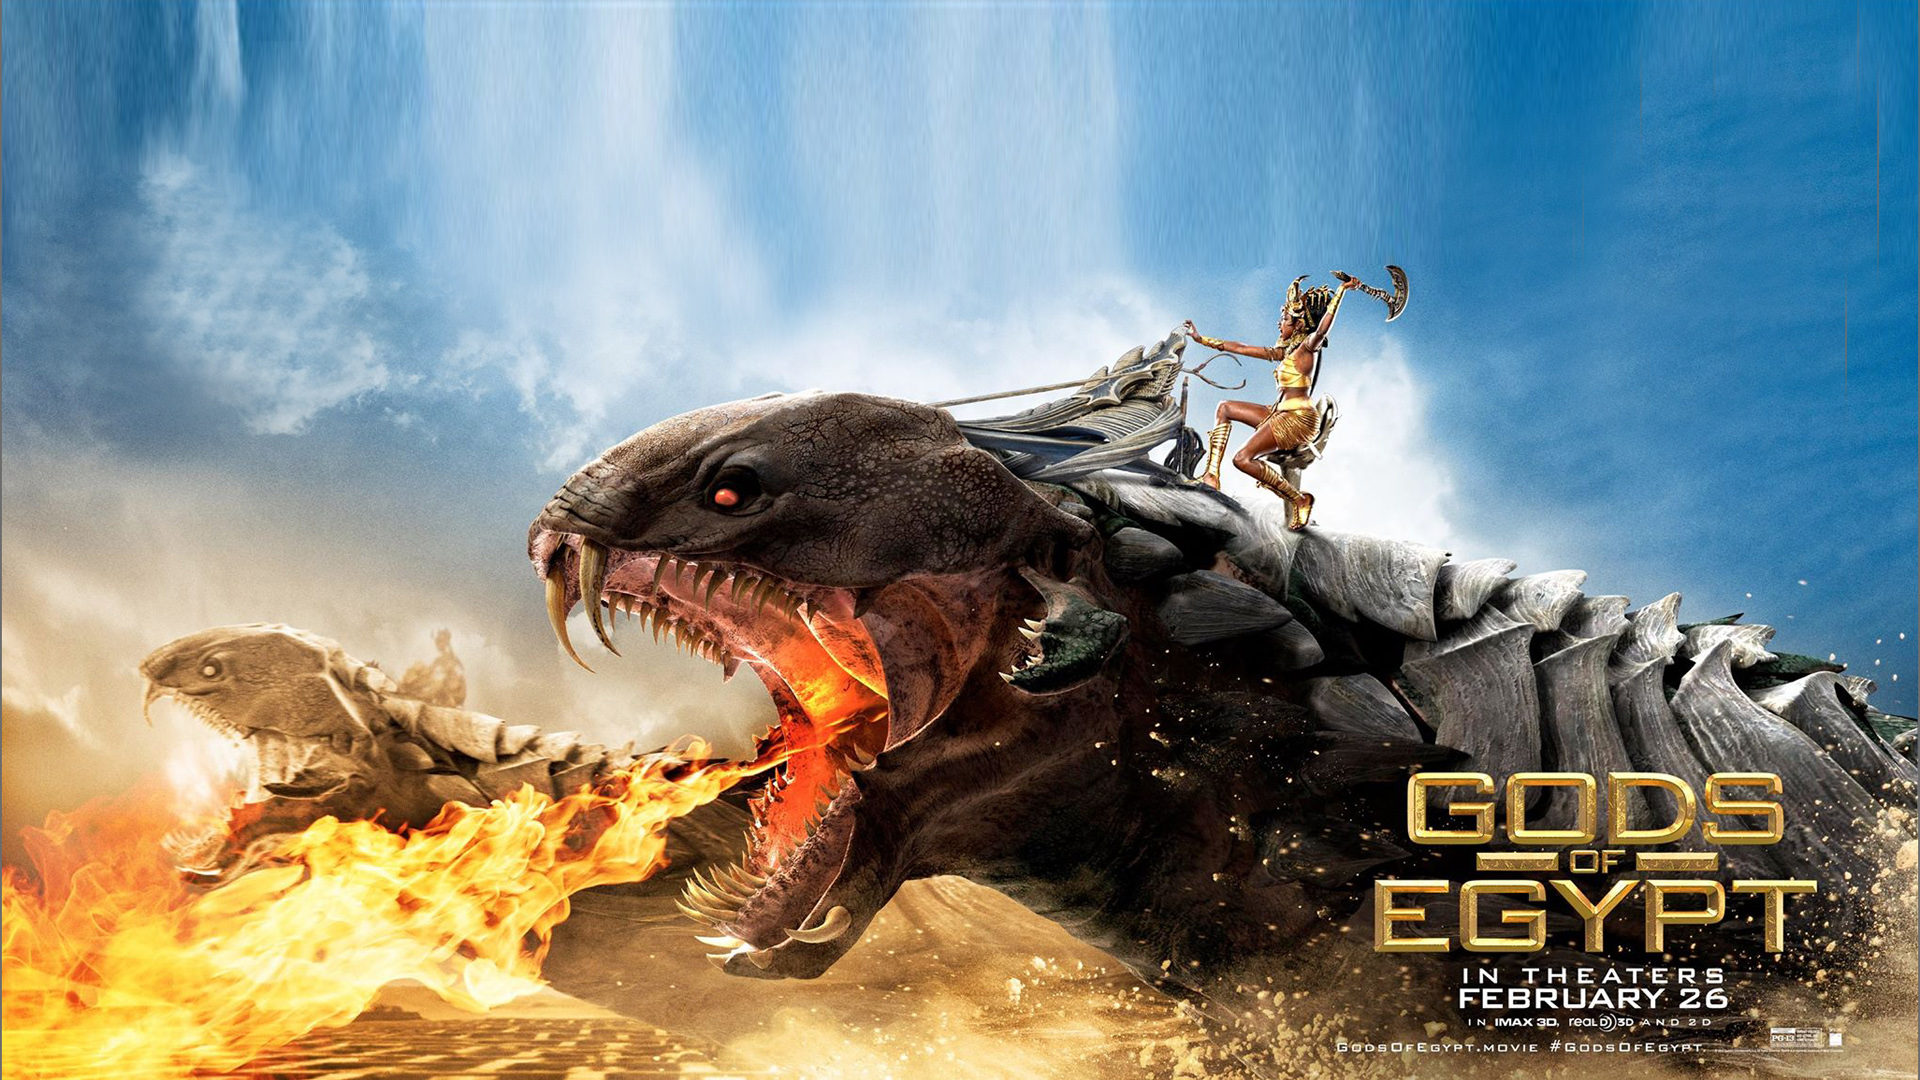 Gods of egypt movie poster desktop hd wallpapers for mobile phones and puter x